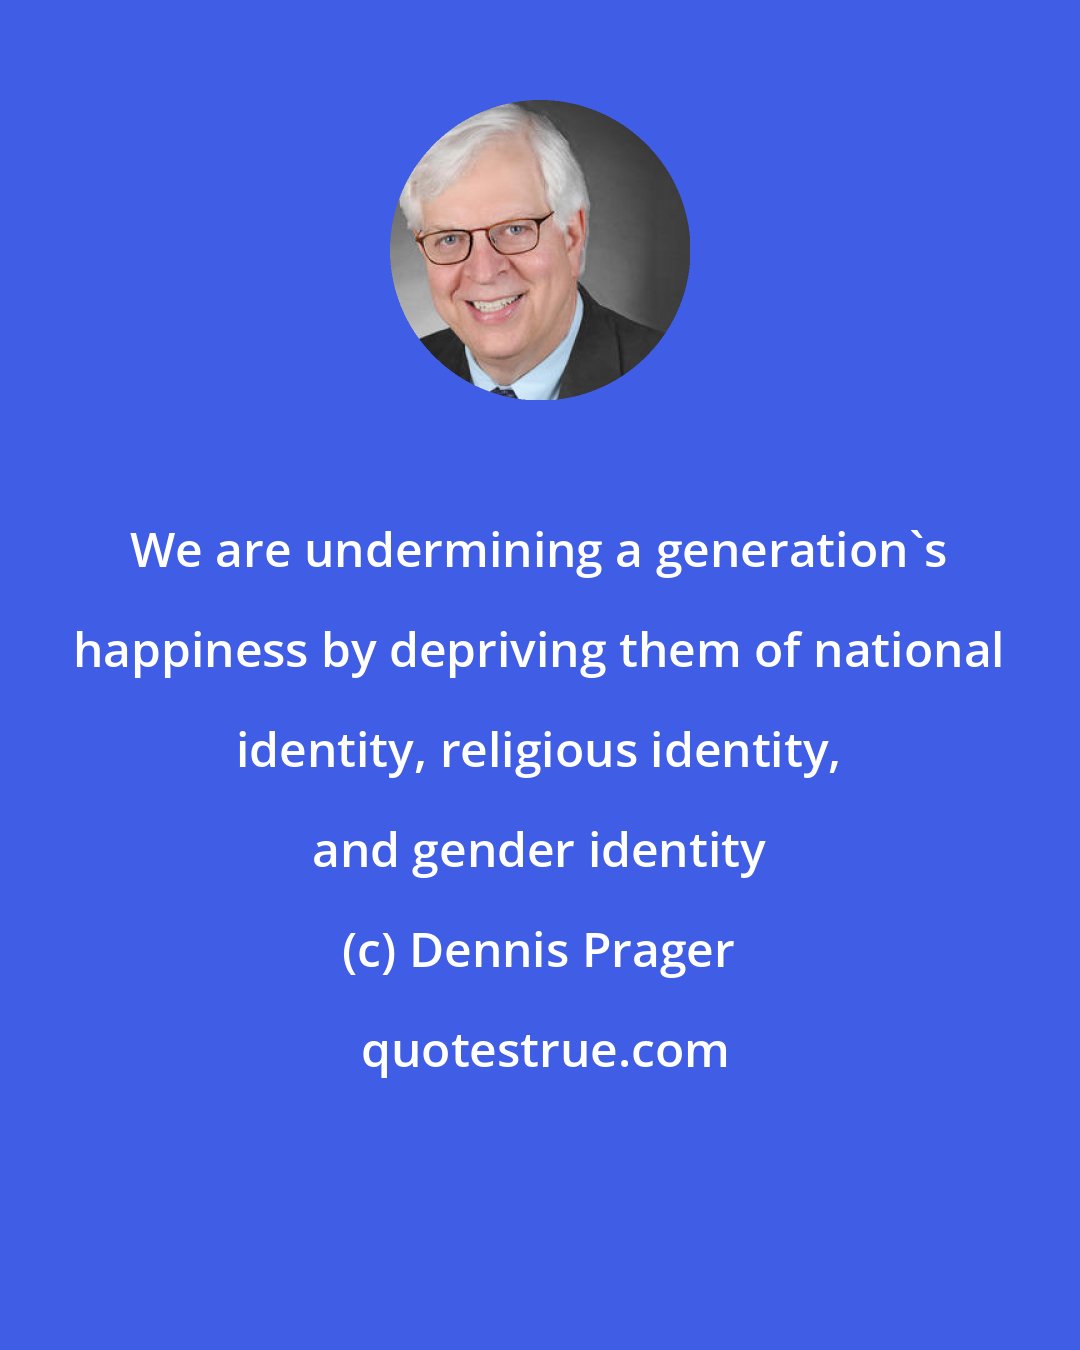 Dennis Prager: We are undermining a generation's happiness by depriving them of national identity, religious identity, and gender identity